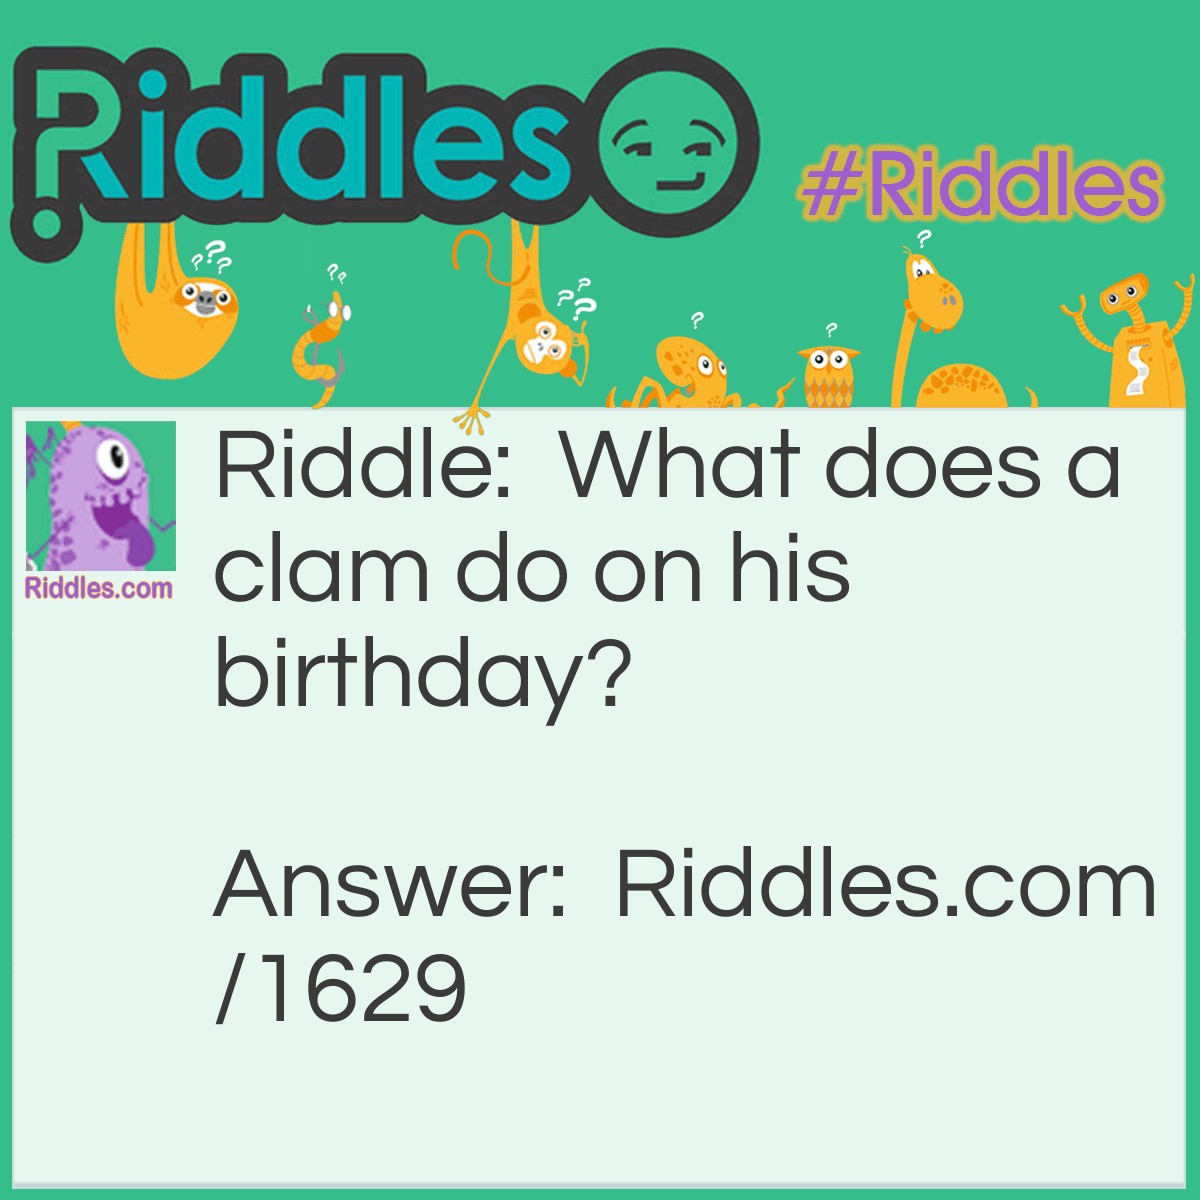 Riddle: What does a clam do on his birthday? Answer: He shell-ebrates!